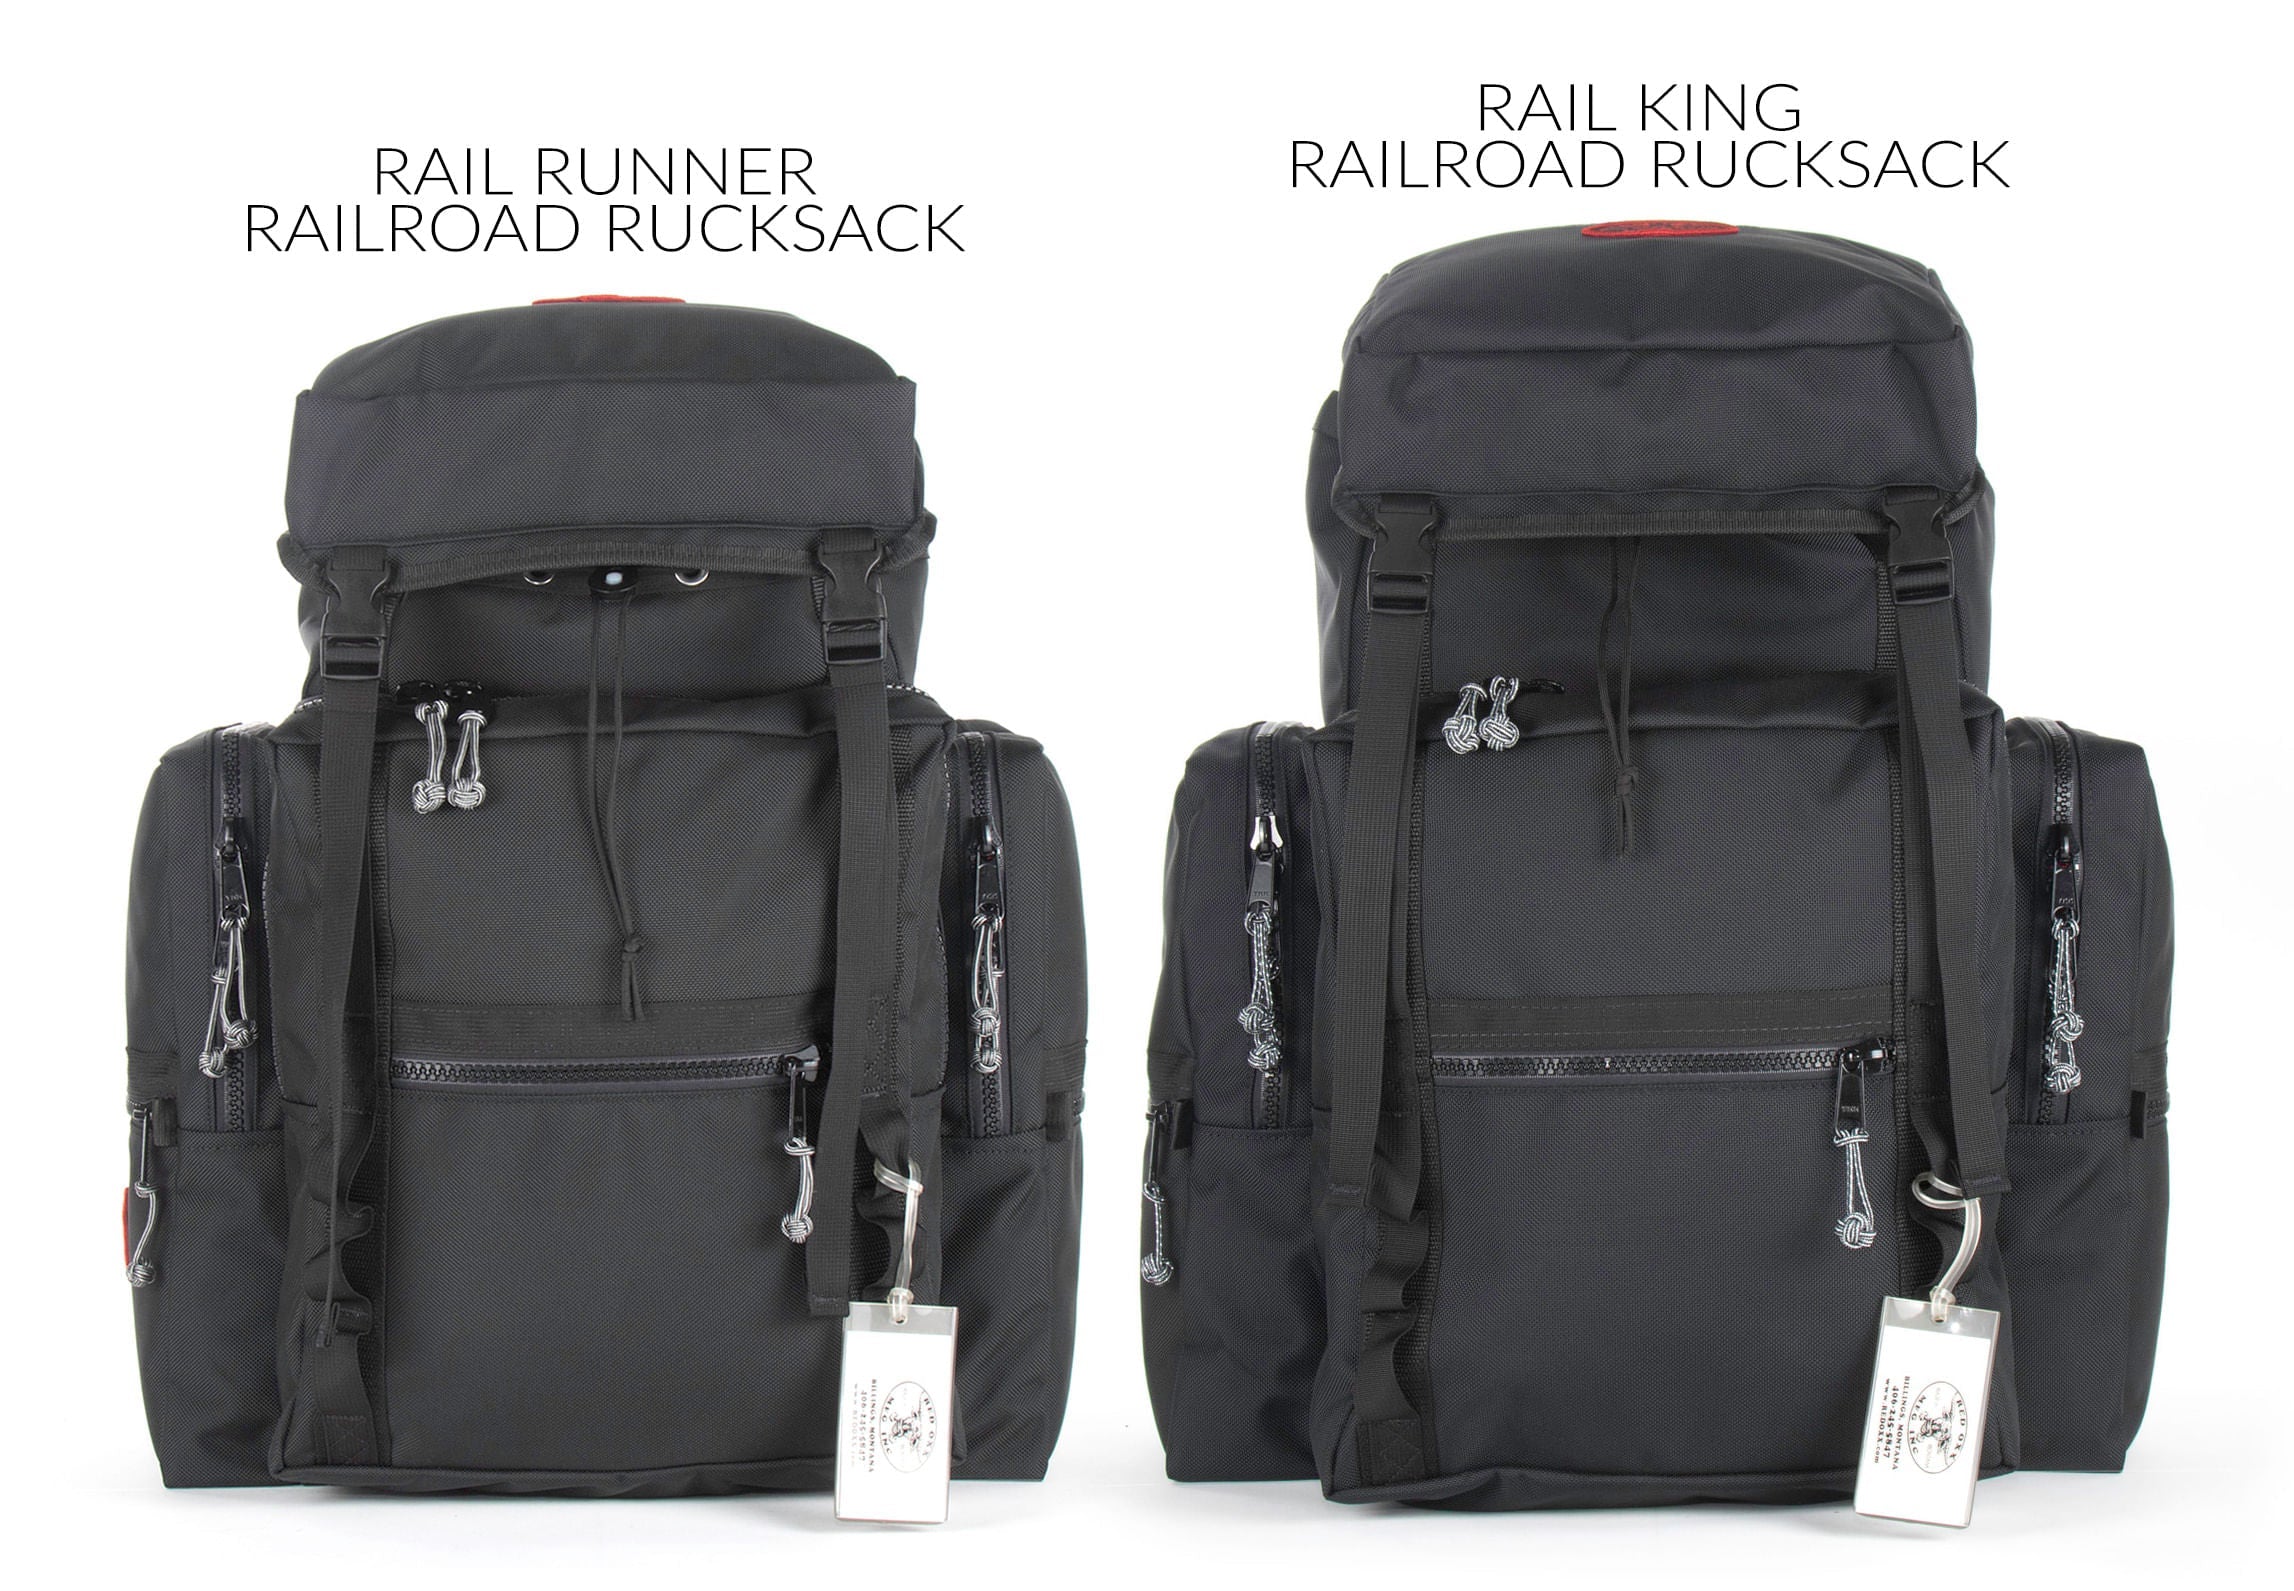 size comparison from left to right Rail Runner - Rail King Rucksack. 